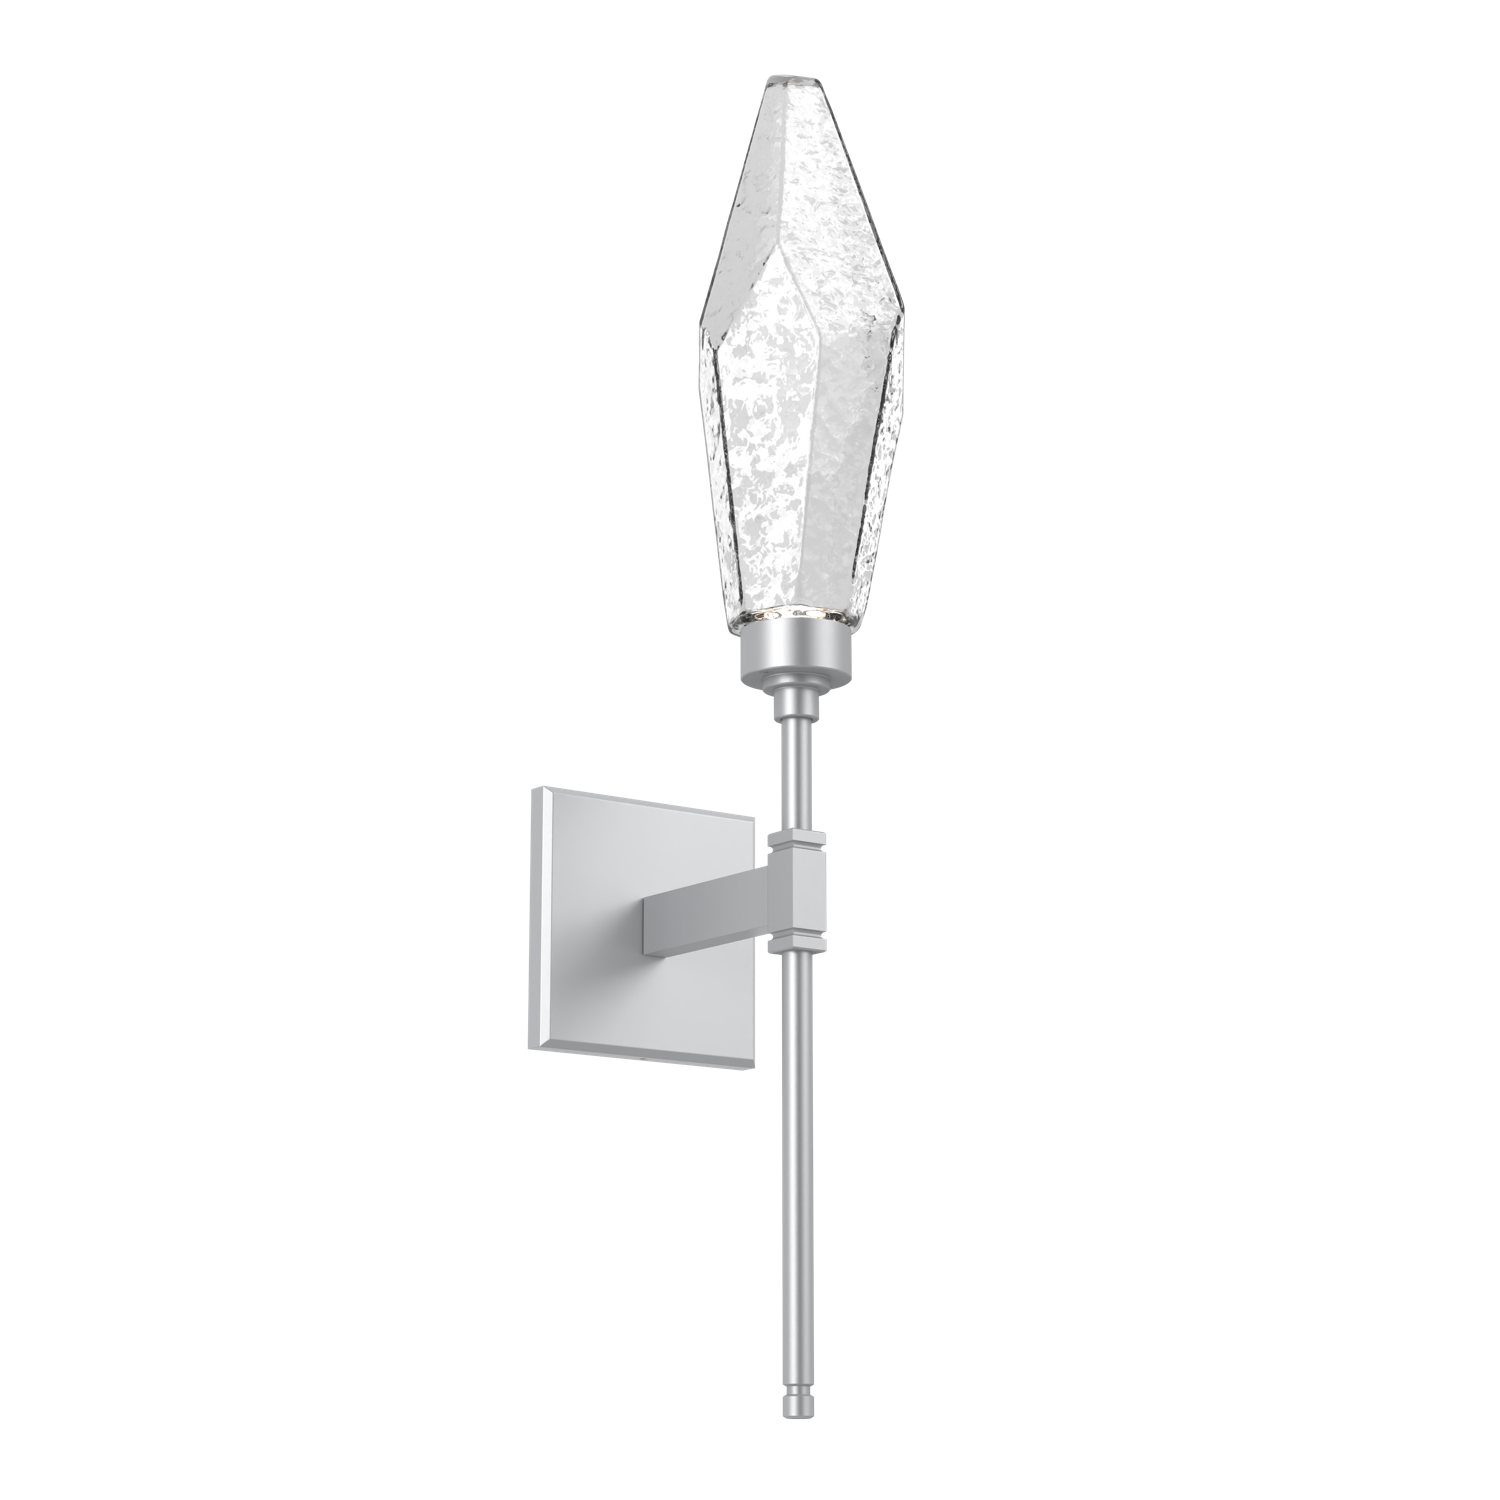 IDB0050-07-CS-CC-Hammerton-Studio-Rock-Crystal-belvedere-wall-sconce-with-classic-silver-finish-and-clear-glass-shades-and-LED-lamping